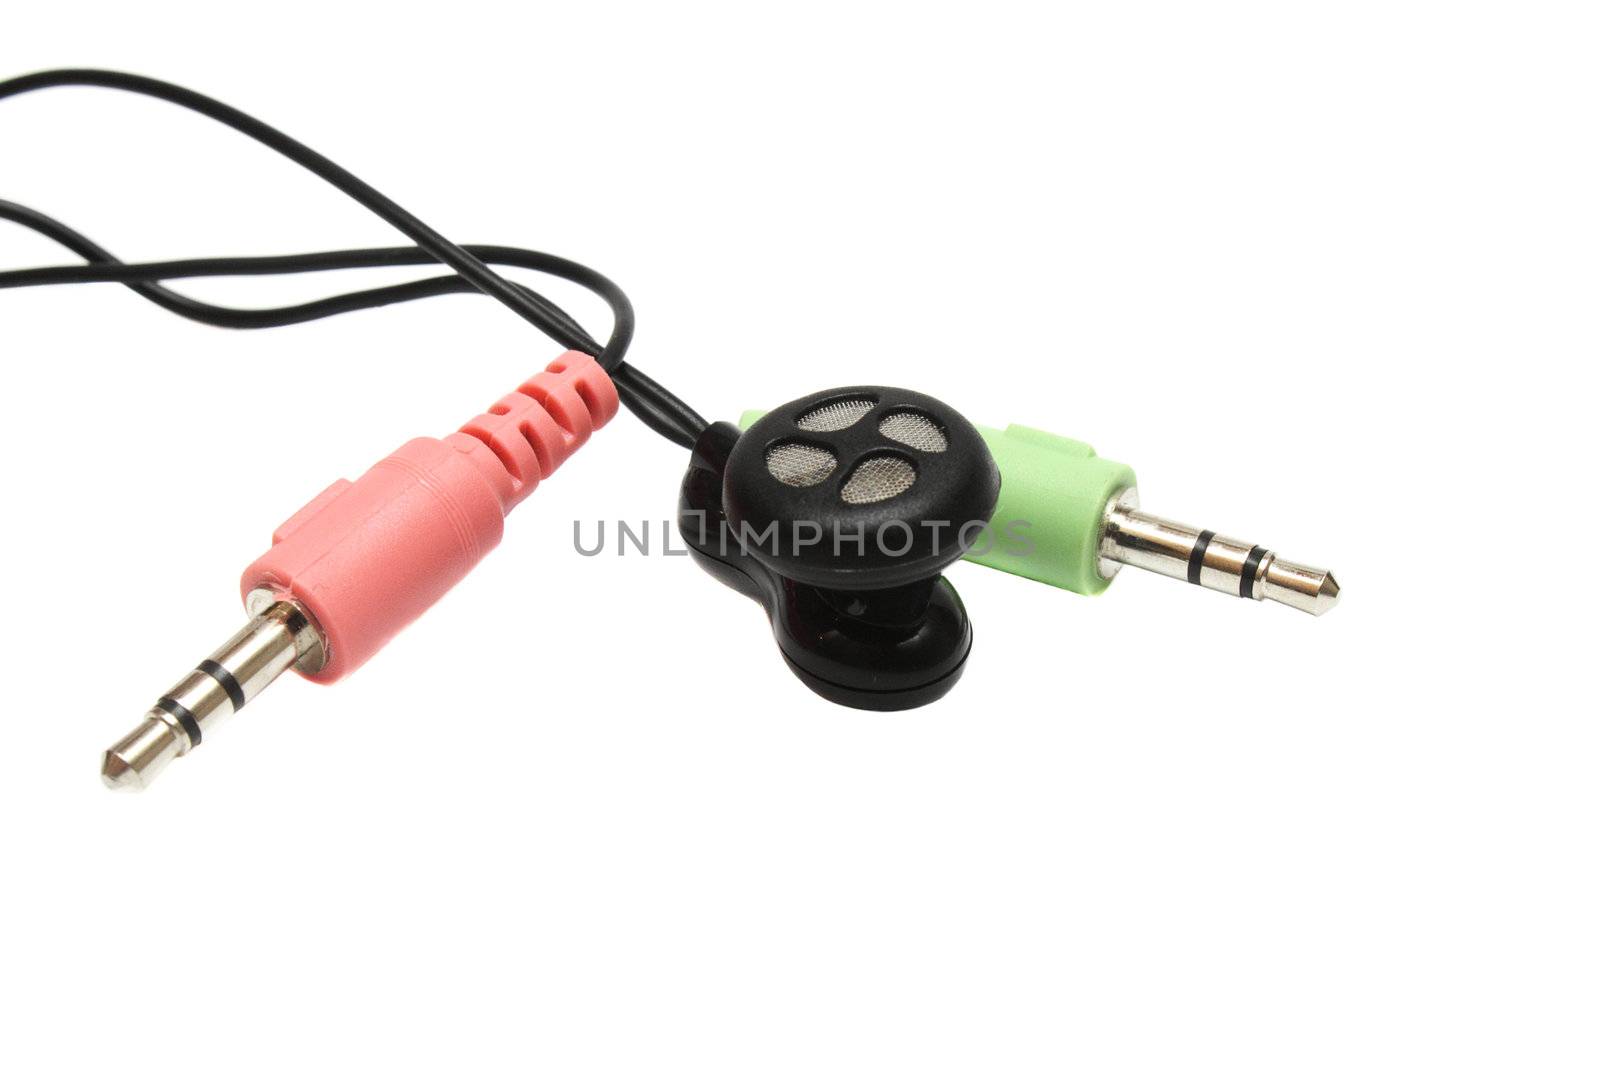 Microphone and headset plugs and a single earphone isolated on white background